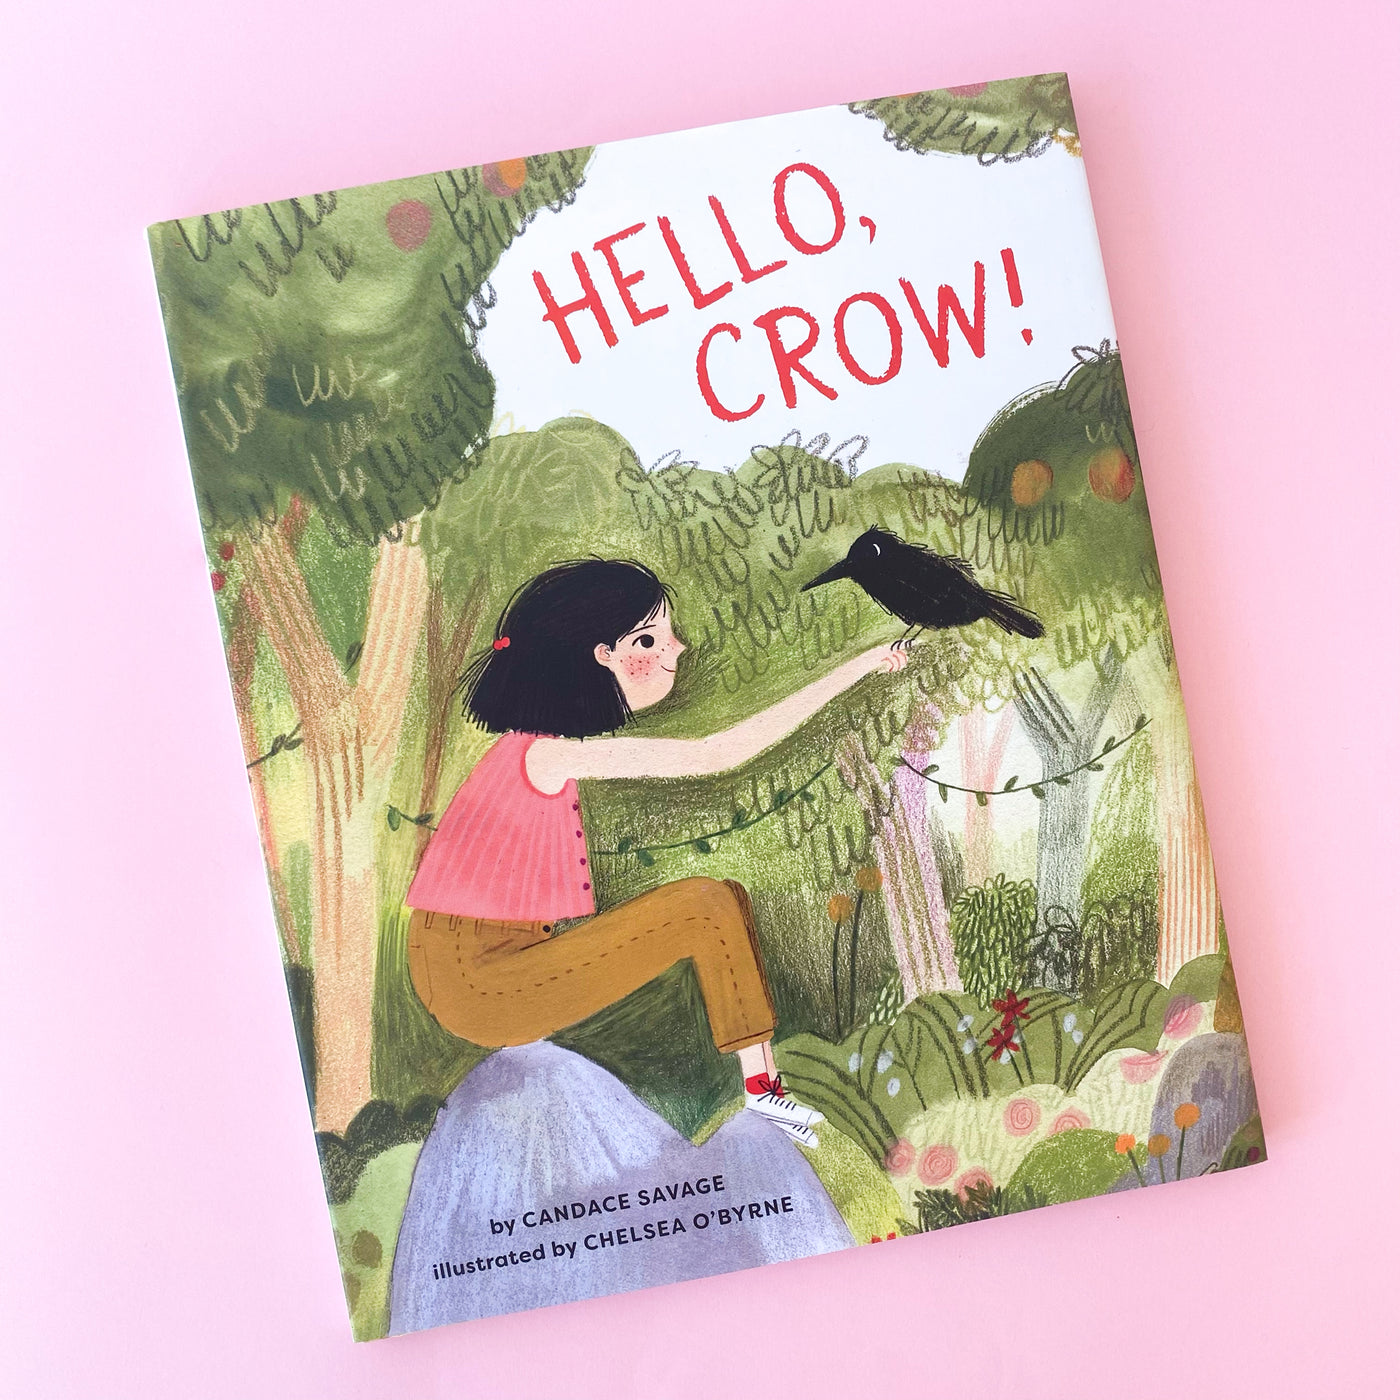 Hello Crow by Candace Savage Illustrated by Chelsea O'Byrne